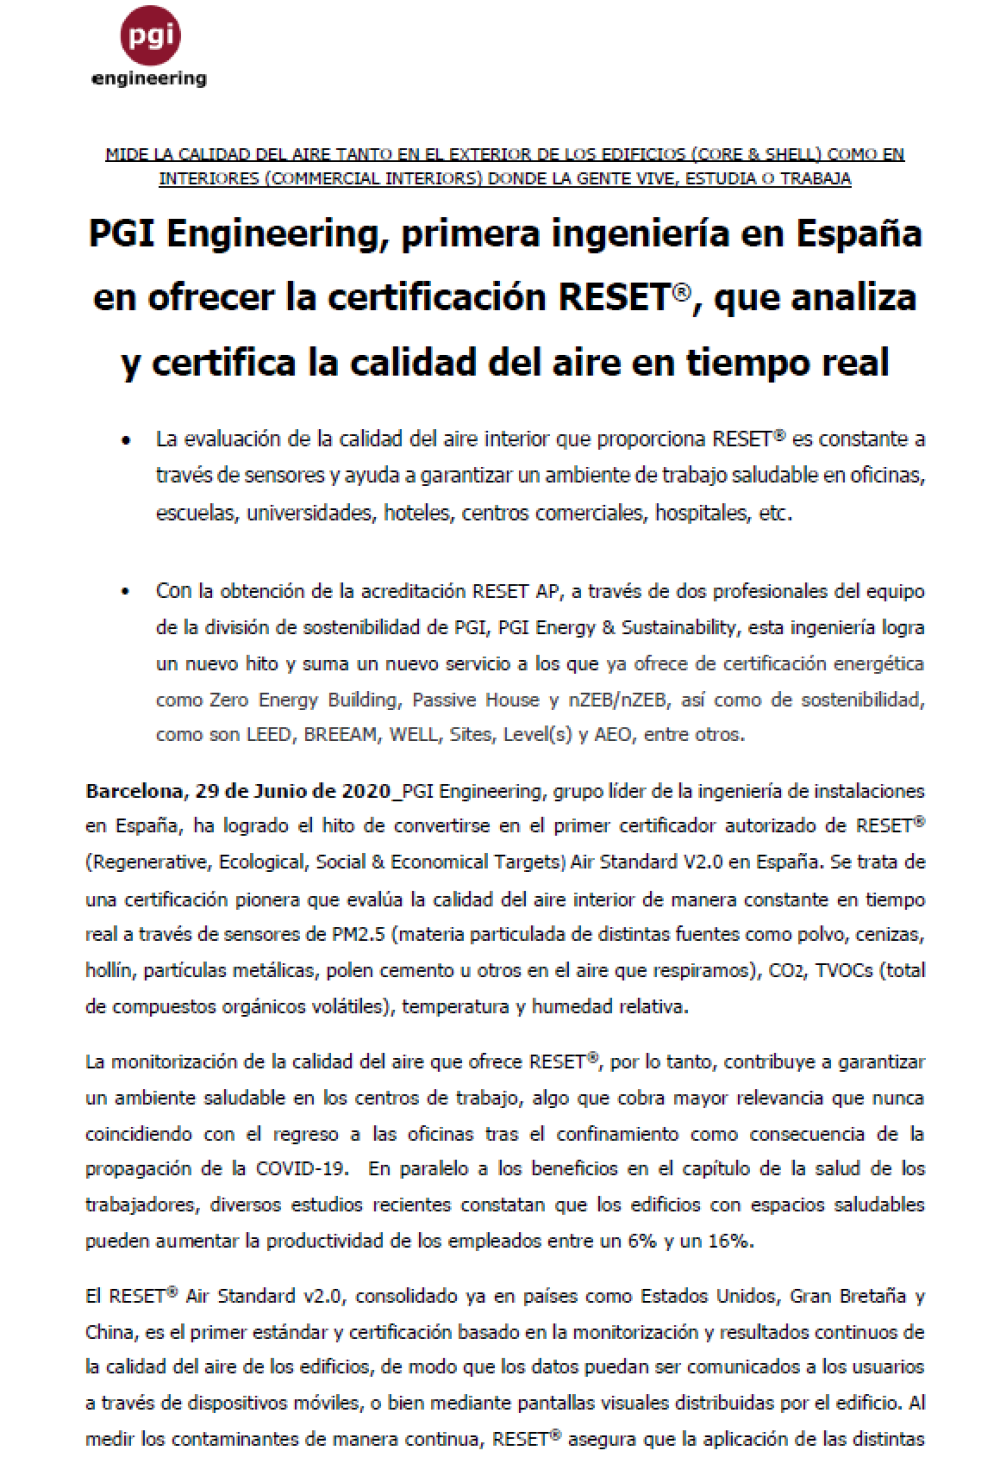 PGI Engineering, first engineering company in Spain to offer RESET® certification, which analyses and certifies air quality in real time